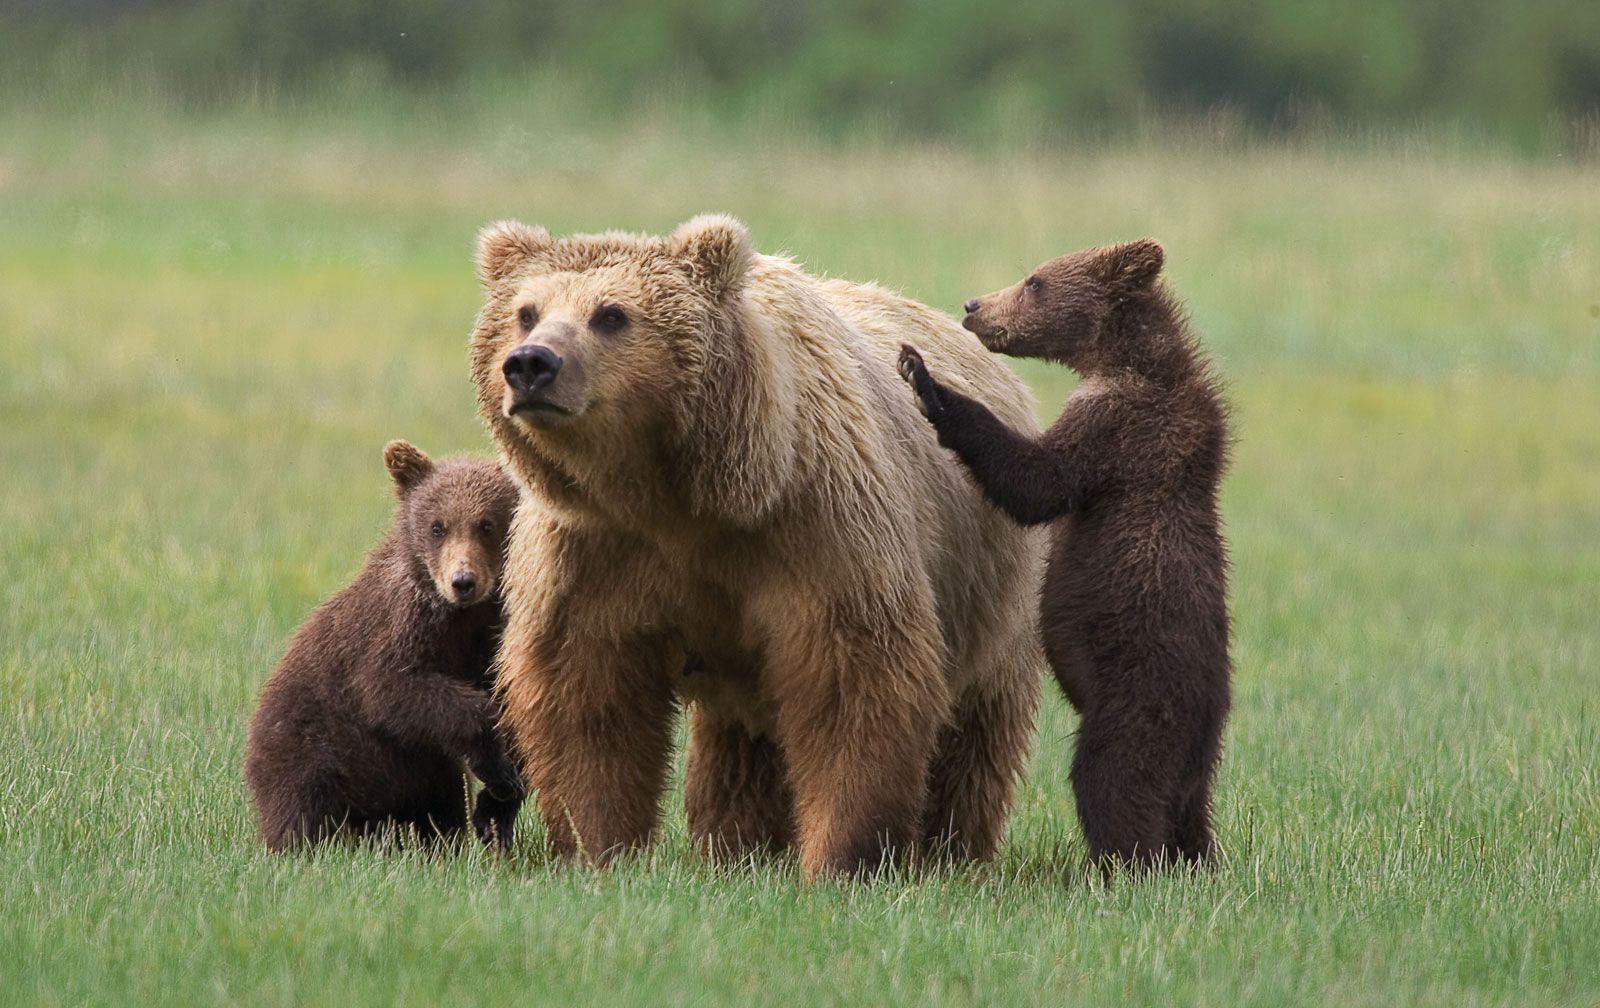 Wallpaper Of The Day: Grizzly Bearx1008px Grizzly Bear Image